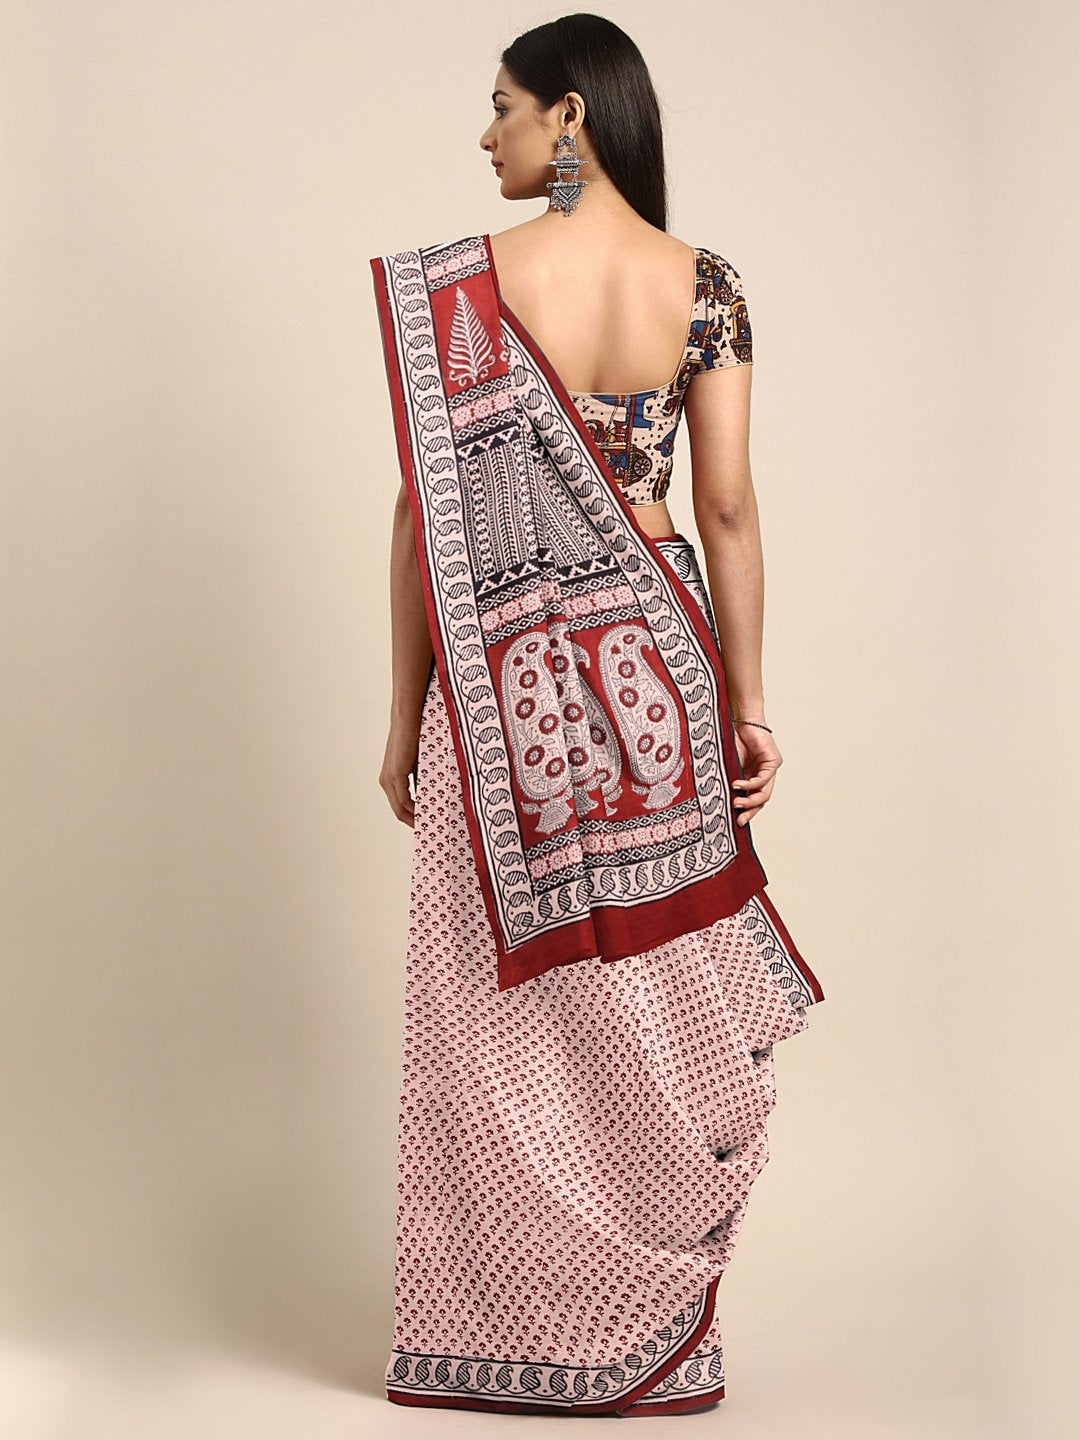 Pink Rust Brown Pure Cotton Handblock Print Saree-Saree-Kalakari India-MYBASA0011-Bagh, Cotton, Geographical Indication, Hand Blocks, Hand Crafted, Heritage Prints, Natural Dyes, Sarees, Sustainable Fabrics-[Linen,Ethnic,wear,Fashionista,Handloom,Handicraft,Indigo,blockprint,block,print,Cotton,Chanderi,Blue, latest,classy,party,bollywood,trendy,summer,style,traditional,formal,elegant,unique,style,hand,block,print, dabu,booti,gift,present,glamorous,affordable,collectible,Sari,Saree,printed, holi,